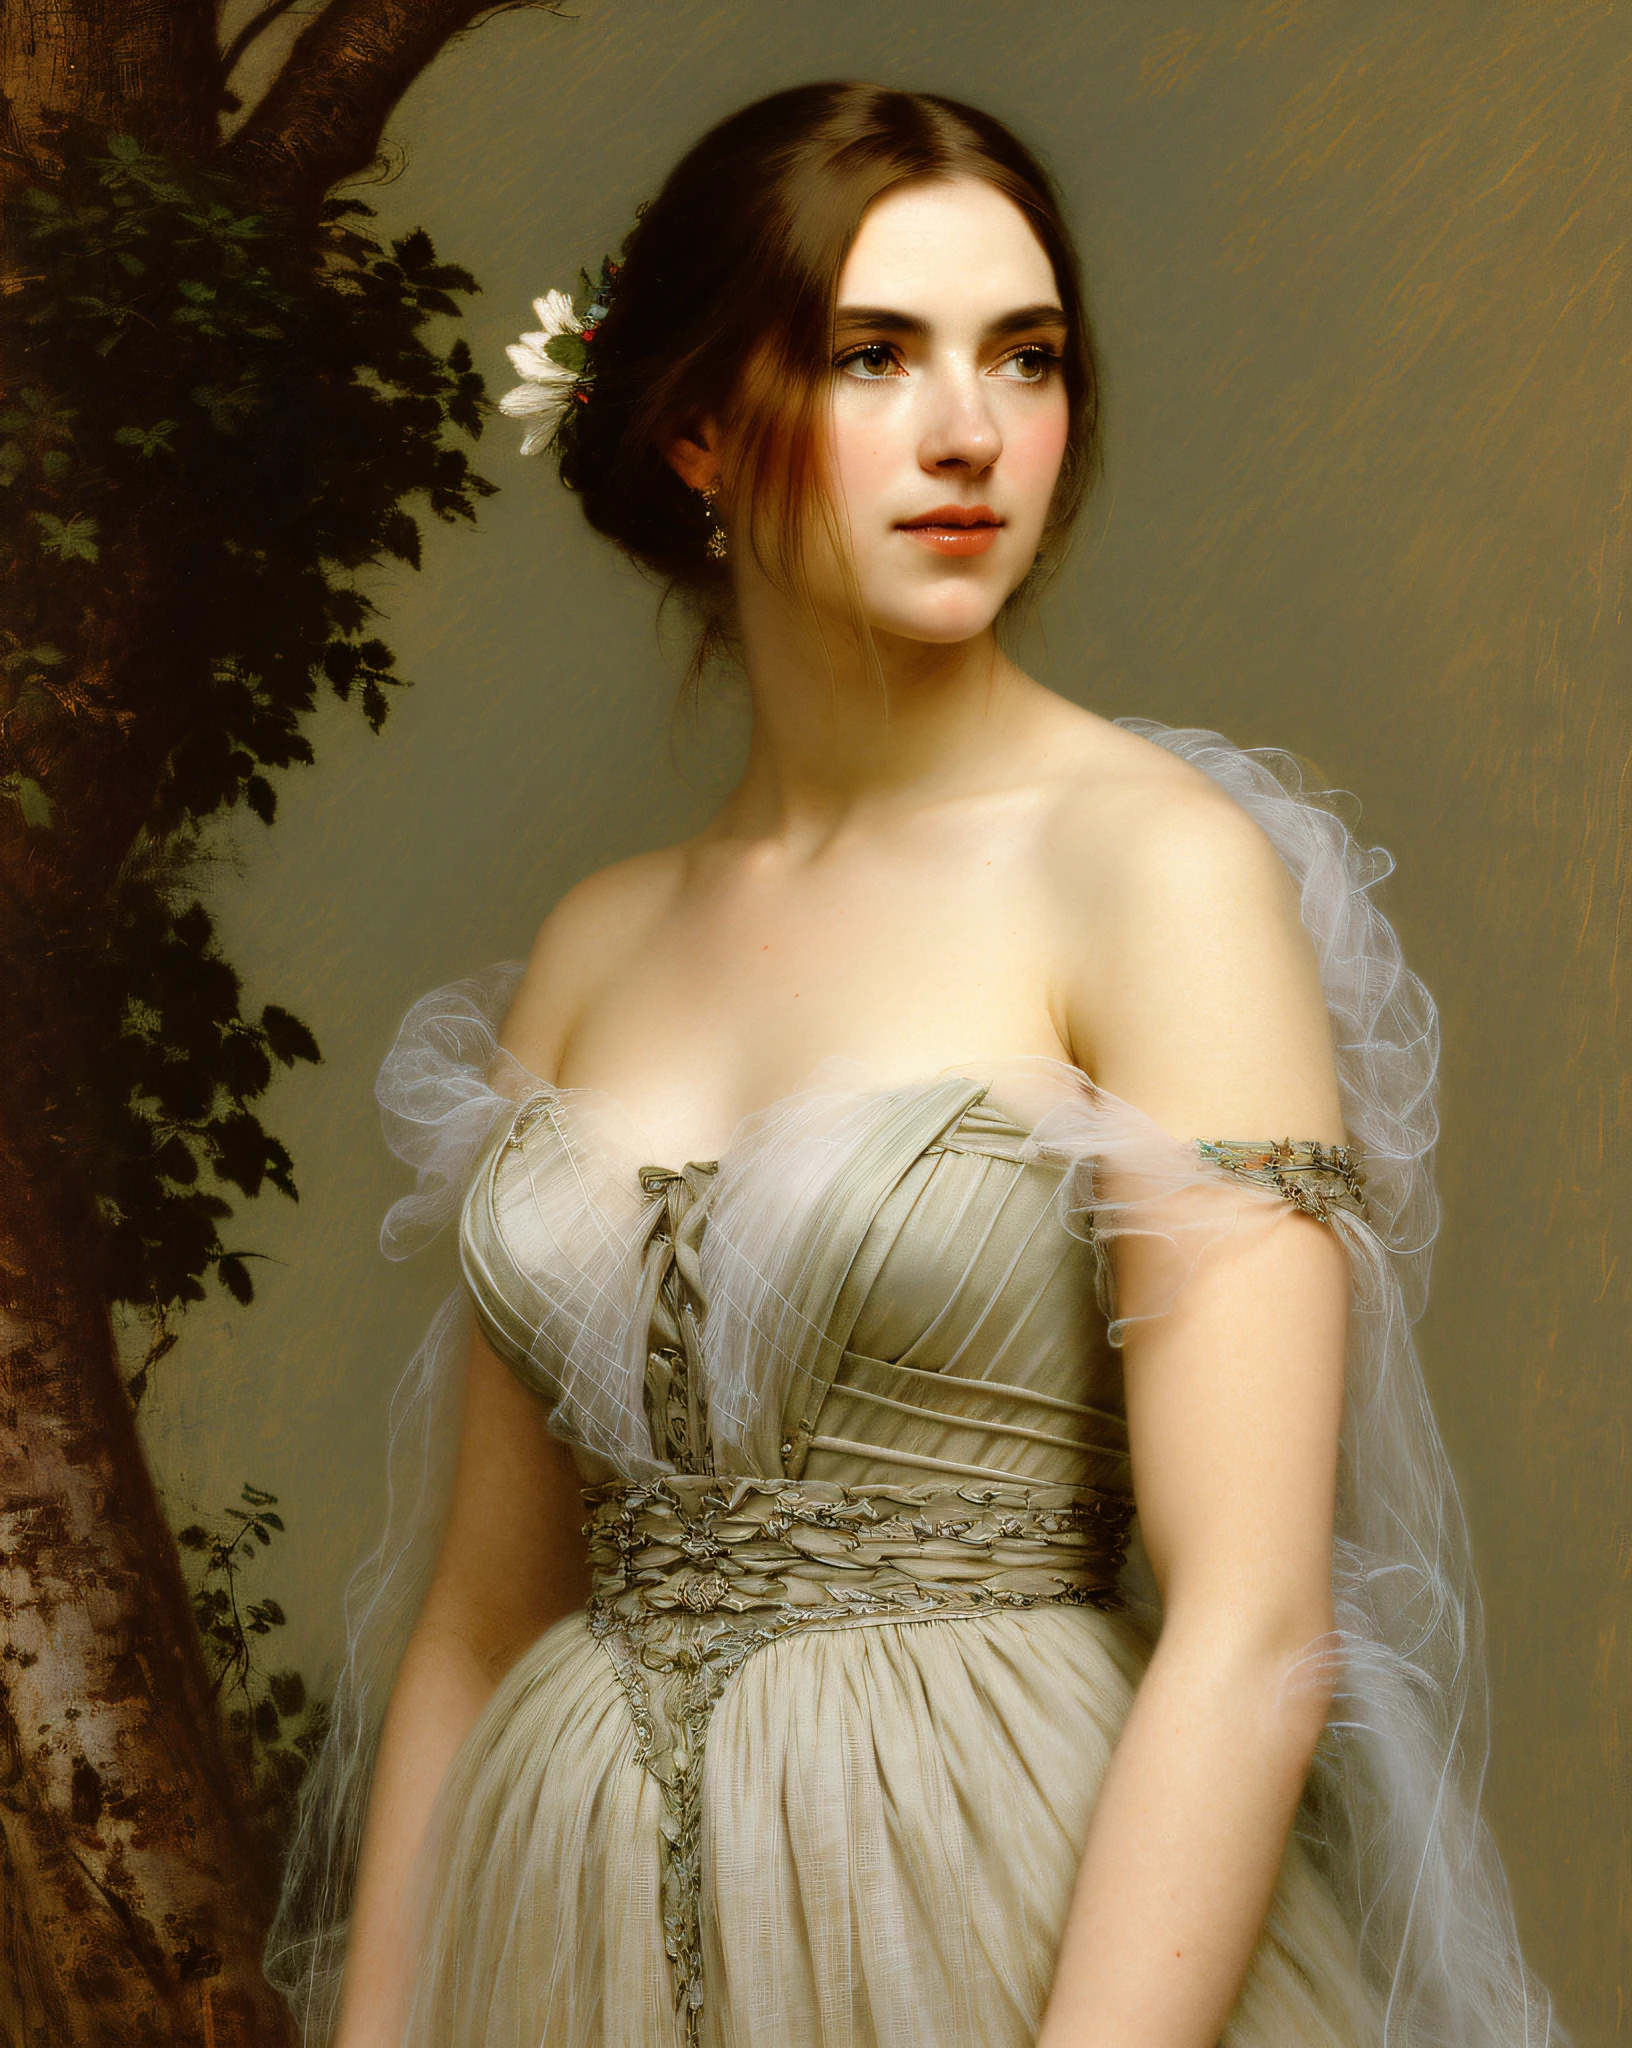 A Crying Woman, A painting by Albert Lynch, Ruan Jia, Gaston Bussiere, Alexandre Cabanel, Daniel F. Gerhartz, Jules Bastien-Lepage, Pierre Auguste Cot, Sophie Anderson, Jeremy Lipking, Thomas Lawrence, Bouguereau, Carle Van Loo, Jules Joseph Lefebvre, Roberto Ferri, 'aesthetically pleasing', exquisite, polished, refined, sophisticated, tasteful, harmonious, well-proportioned, well-formed, well-arranged, smooth, proportional